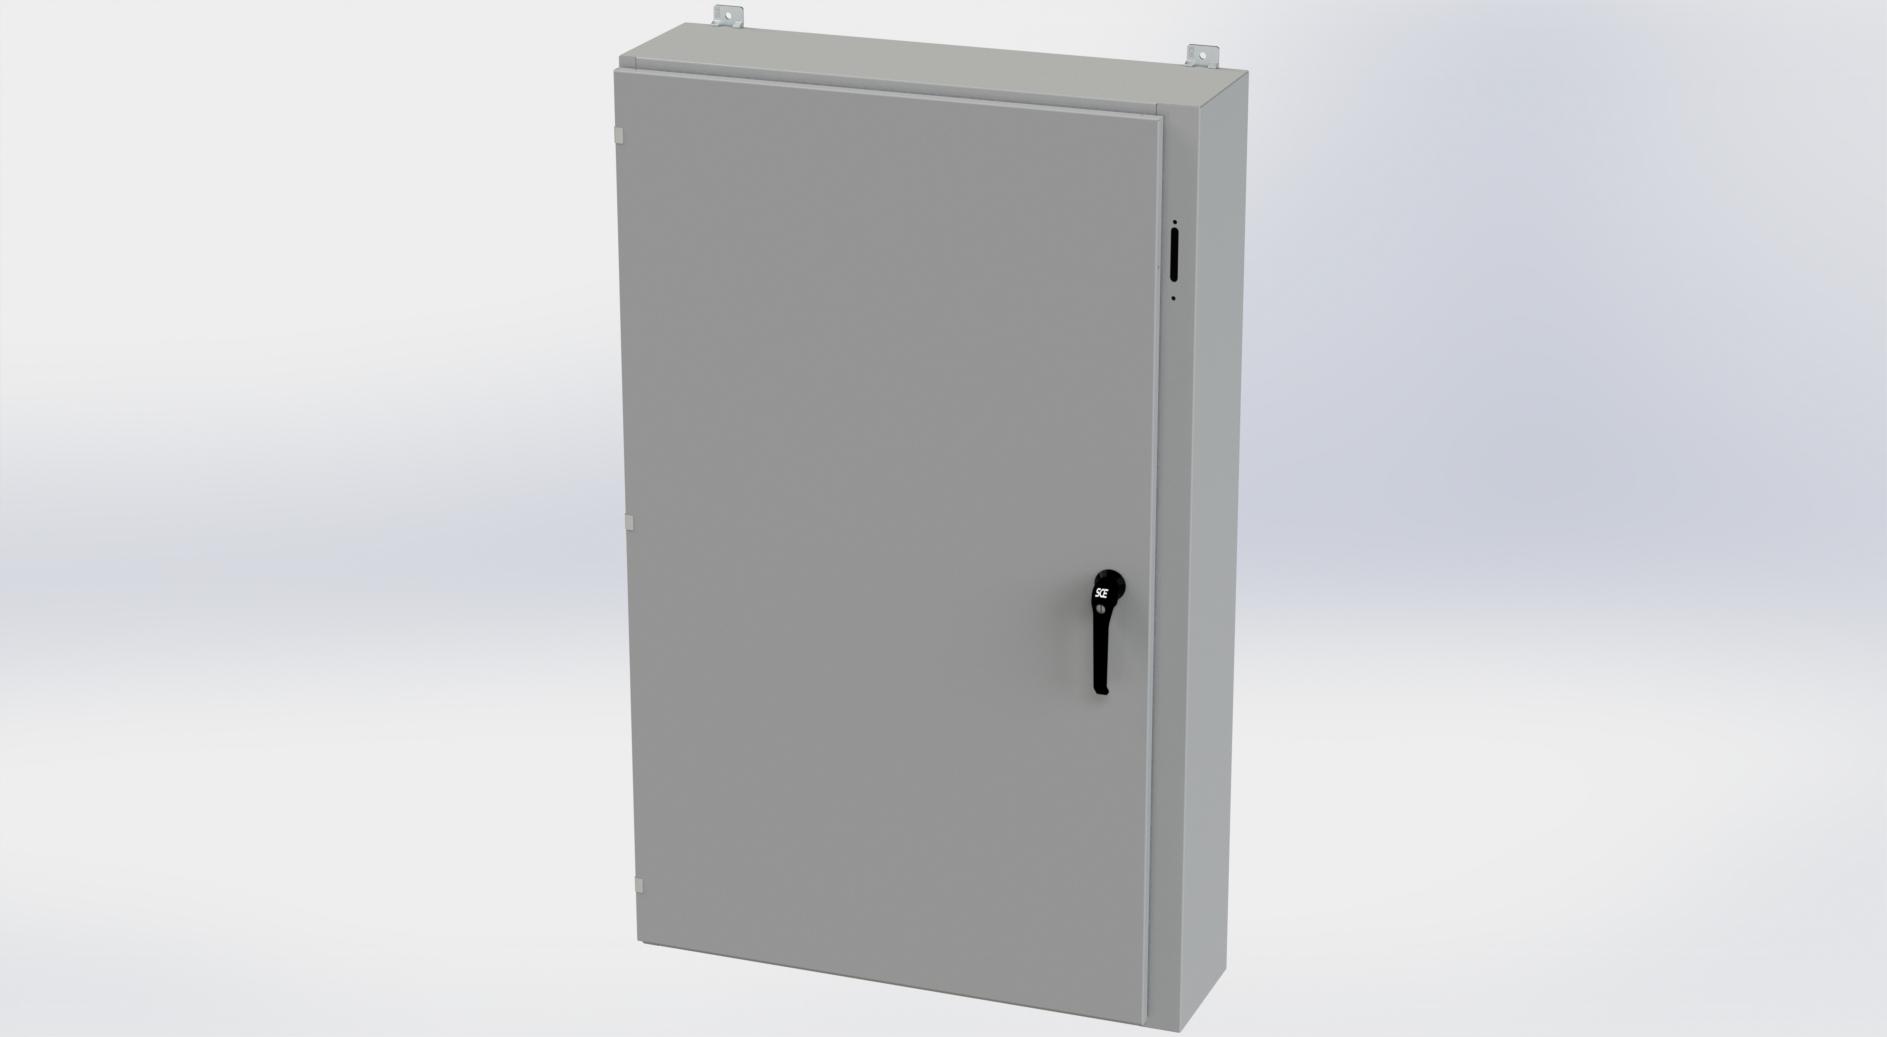 Saginaw Control SCE-60SA3810LPPL Obselete Use SCE-60XEL3710LP, Height:60.00", Width:37.38", Depth:10.00", ANSI-61 gray powder coating inside and out. Optional sub-panels are powder coated white.